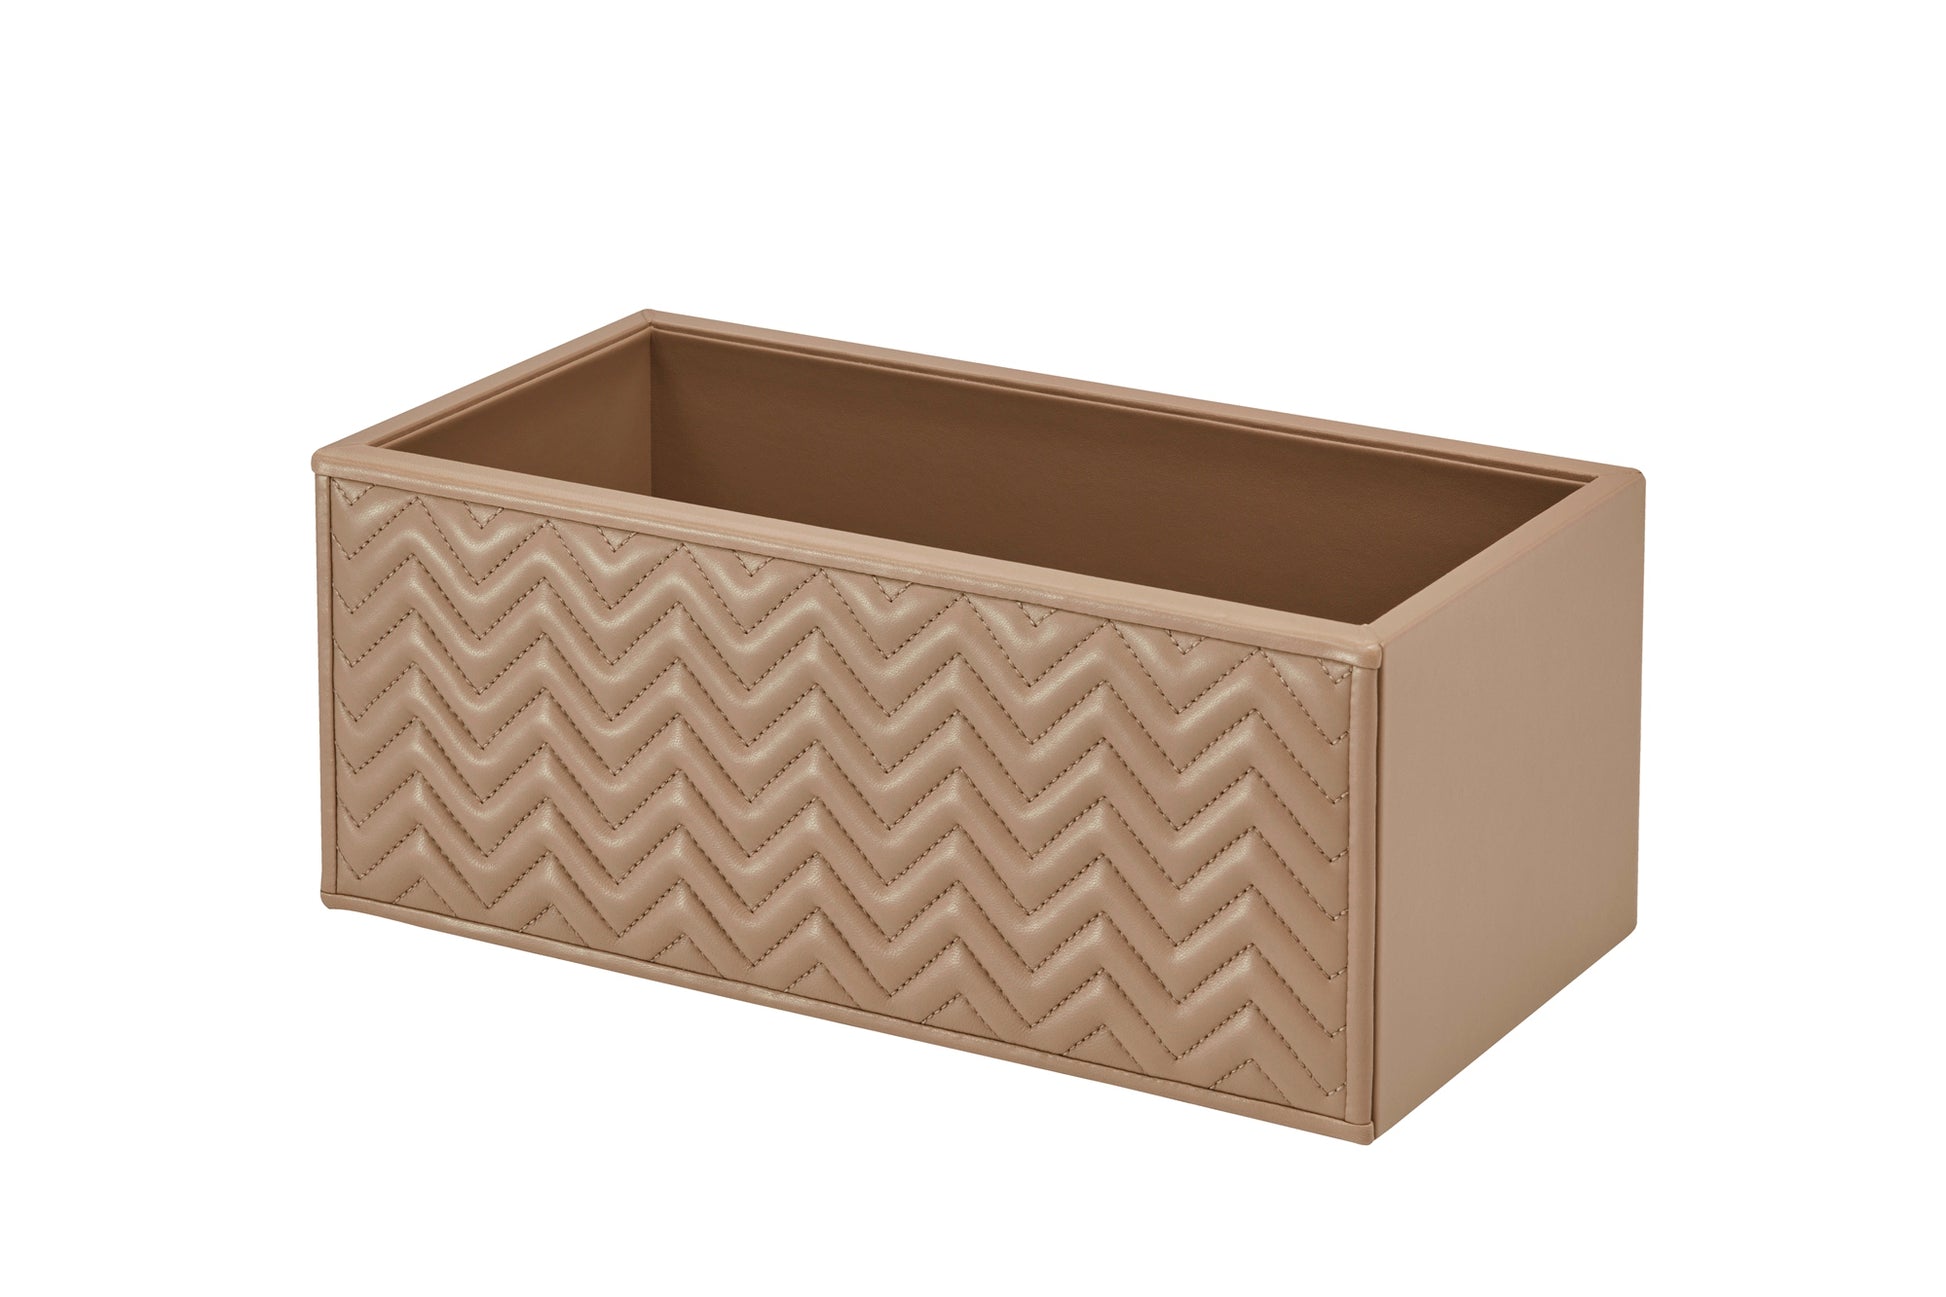 Riviere Scilla Quilted Herringbone Leather Storage Basket | Multi-purpose Container Box | Quilted Herringbone Padded Leather | Perfect for Yacht Decor | Explore a Range of Luxury Home Accessories at 2Jour Concierge, #1 luxury high-end gift & lifestyle shop